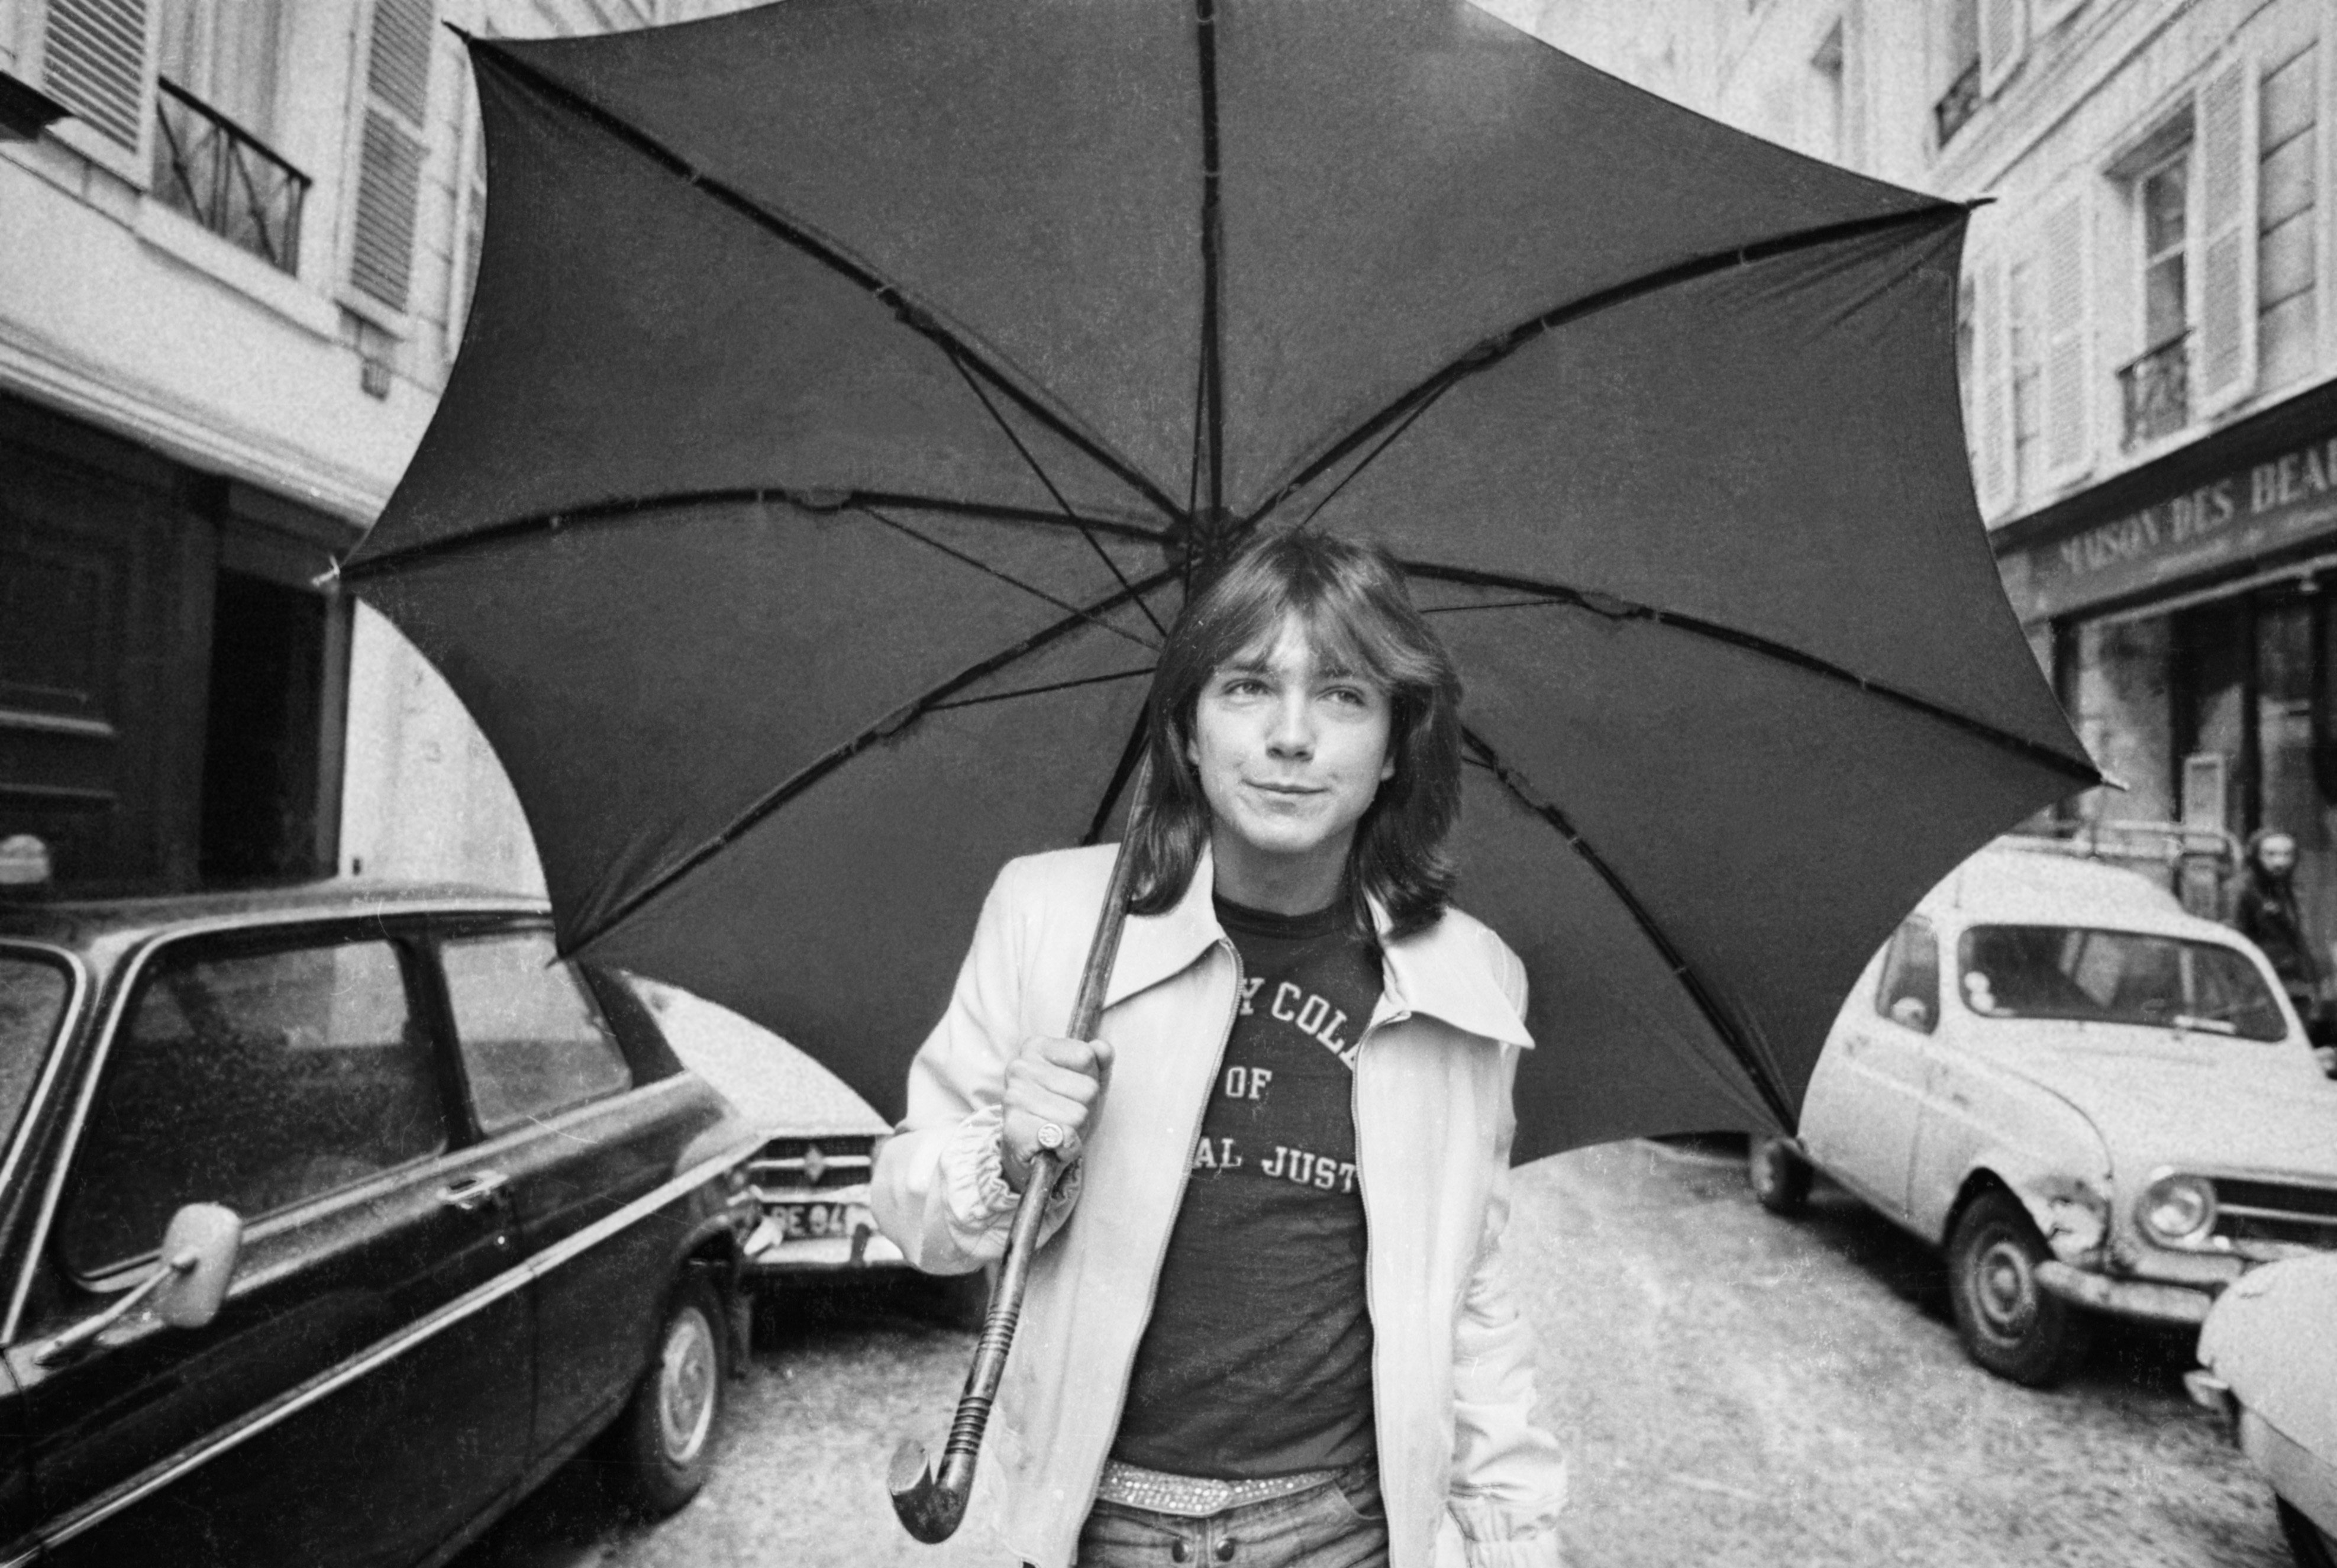 Black and white photo of David Cassidy of 'The Partridge Family' walking down a Paris street under an umbrella